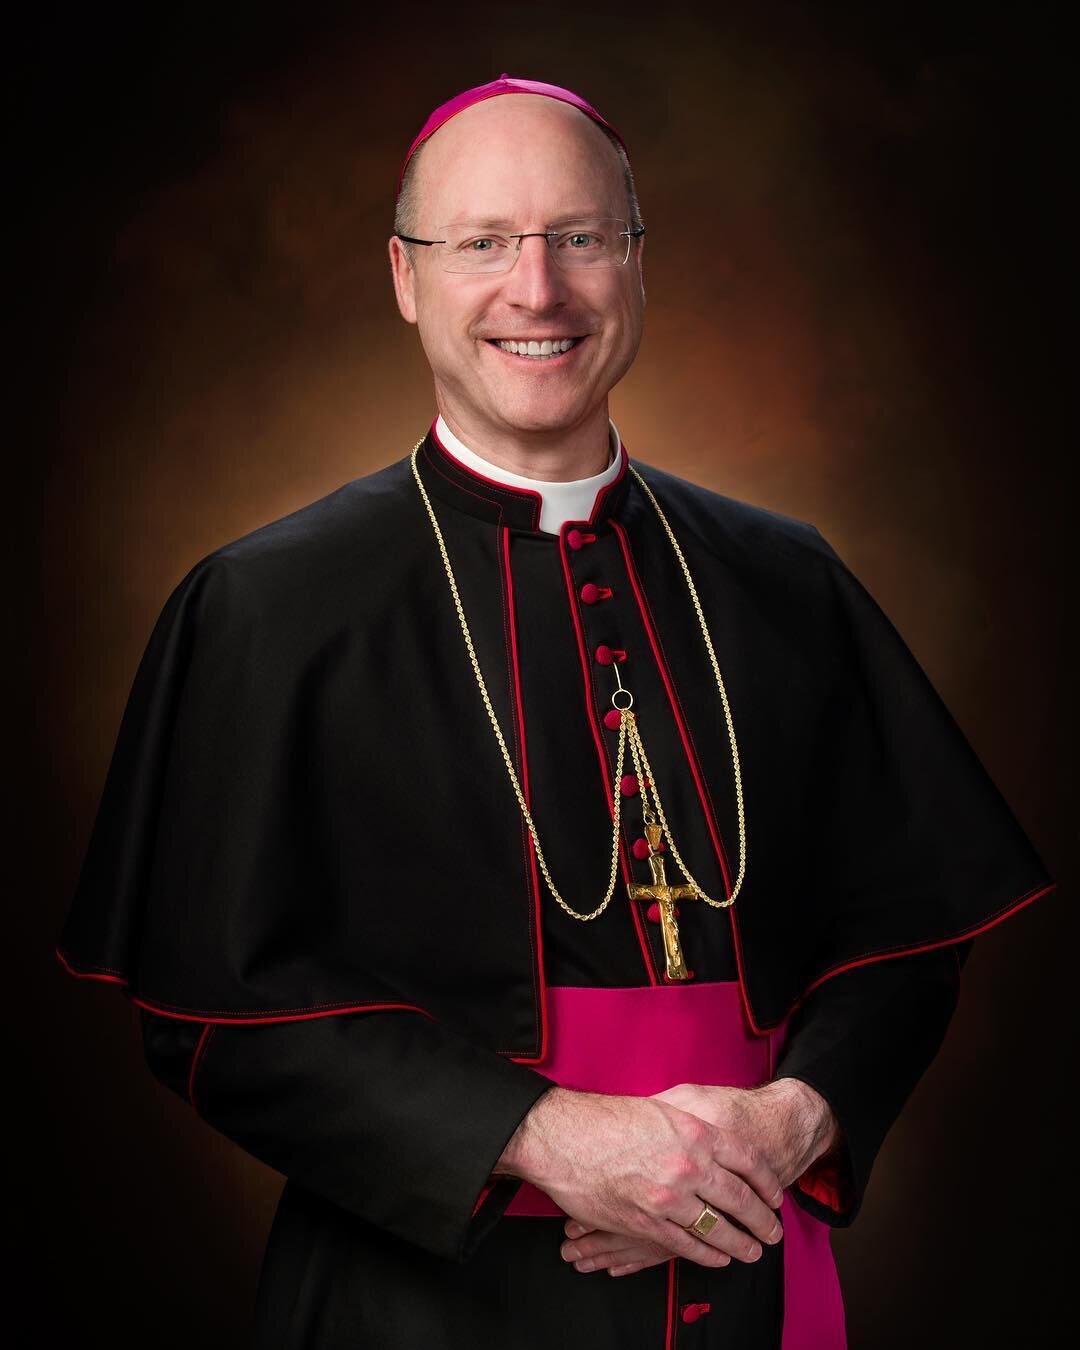 Working with #Bishop Shawn McKnight of the #archdiocese of St. Louis was simply a treat. Appointed by his Holiness Pope Francis as the Fourth Bishop of Jefferson City on November 21, 2017, Bishop McKnight hand selected me to create his official portr